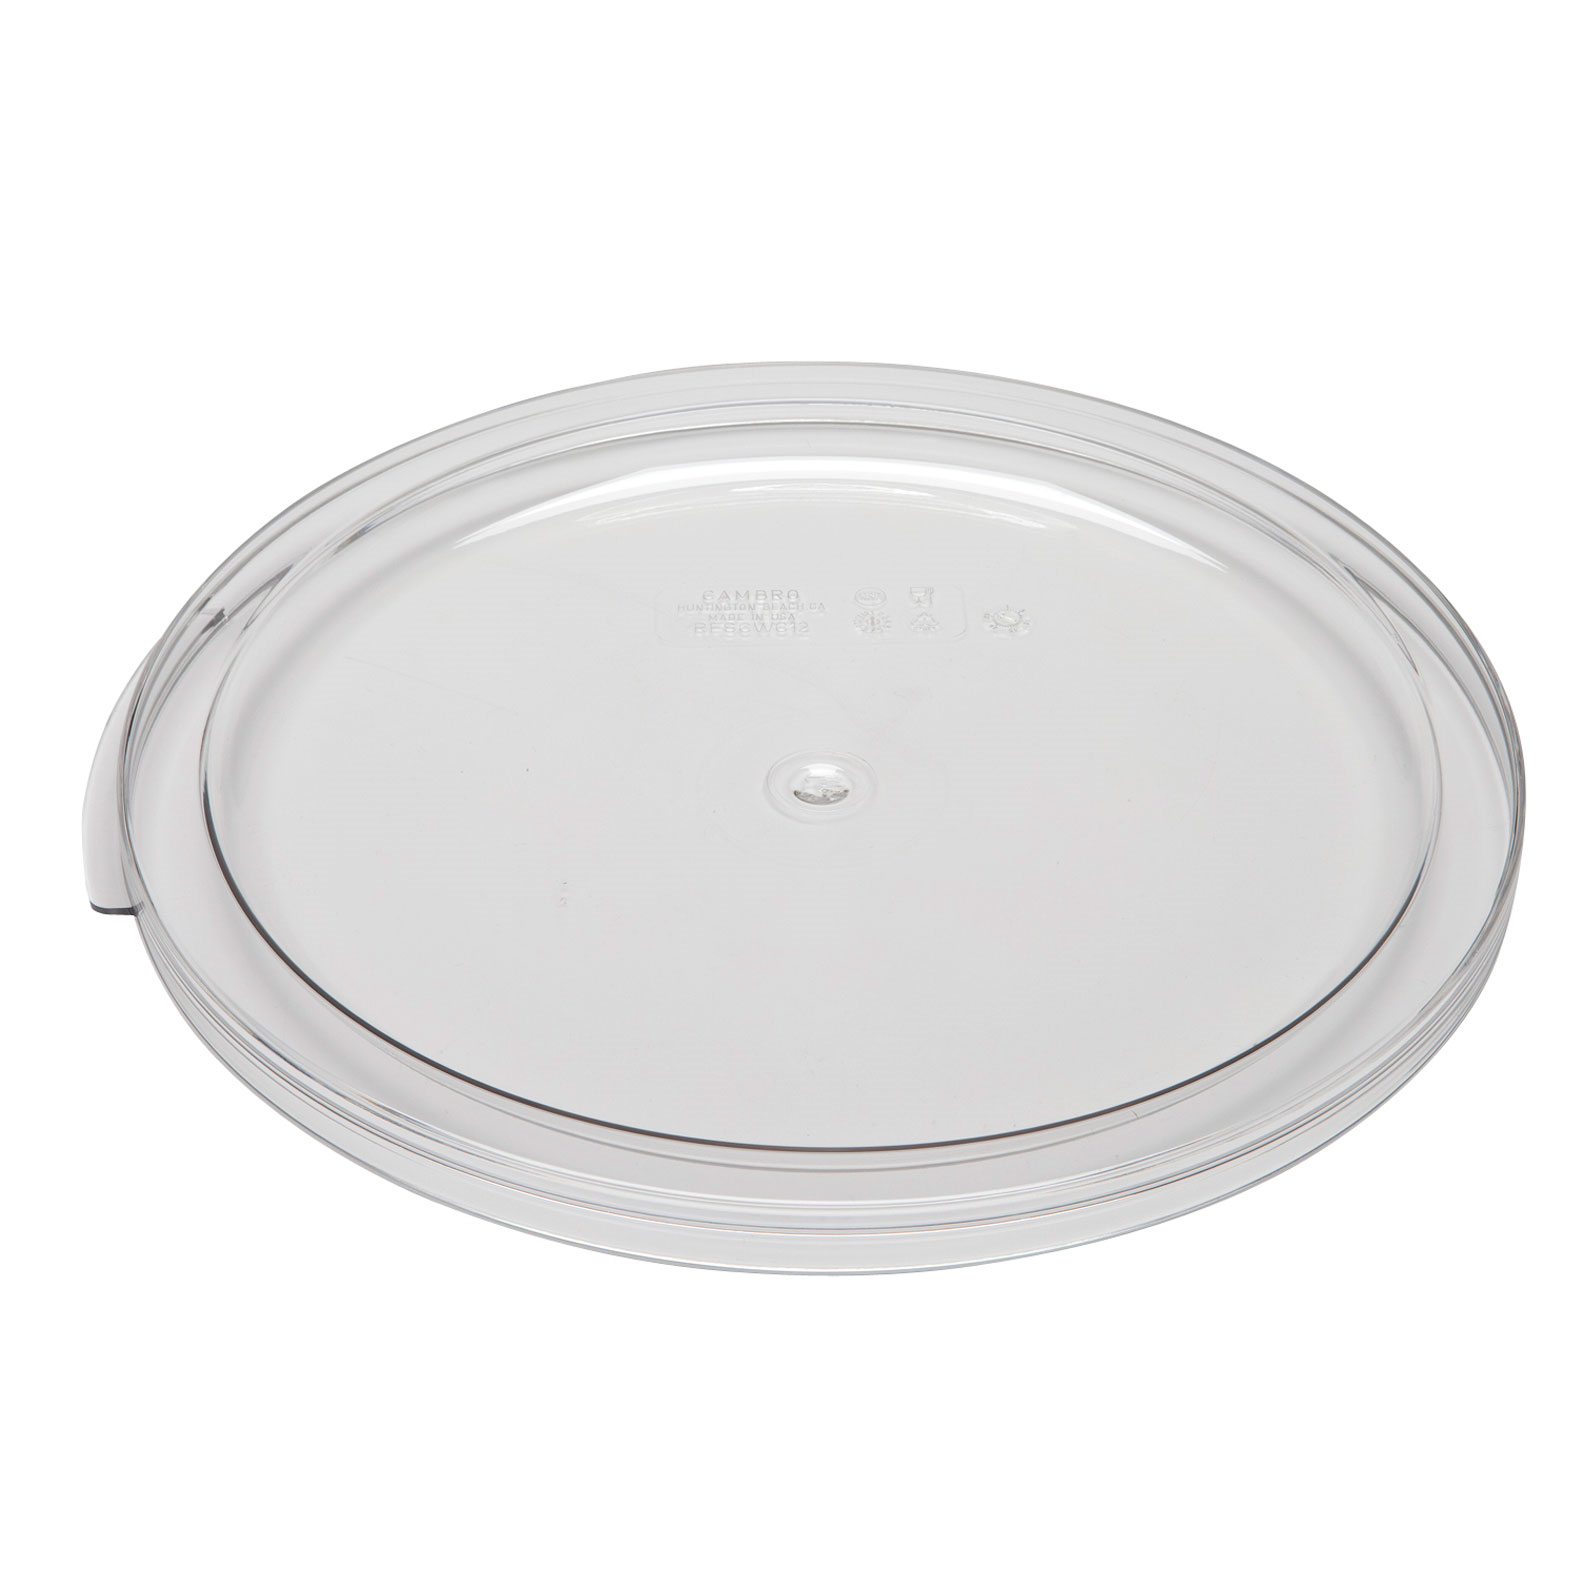 2 &amp; 4qt CLEAR LID FOR ROUND
FOOD STORAGE CONTAINER, EACH